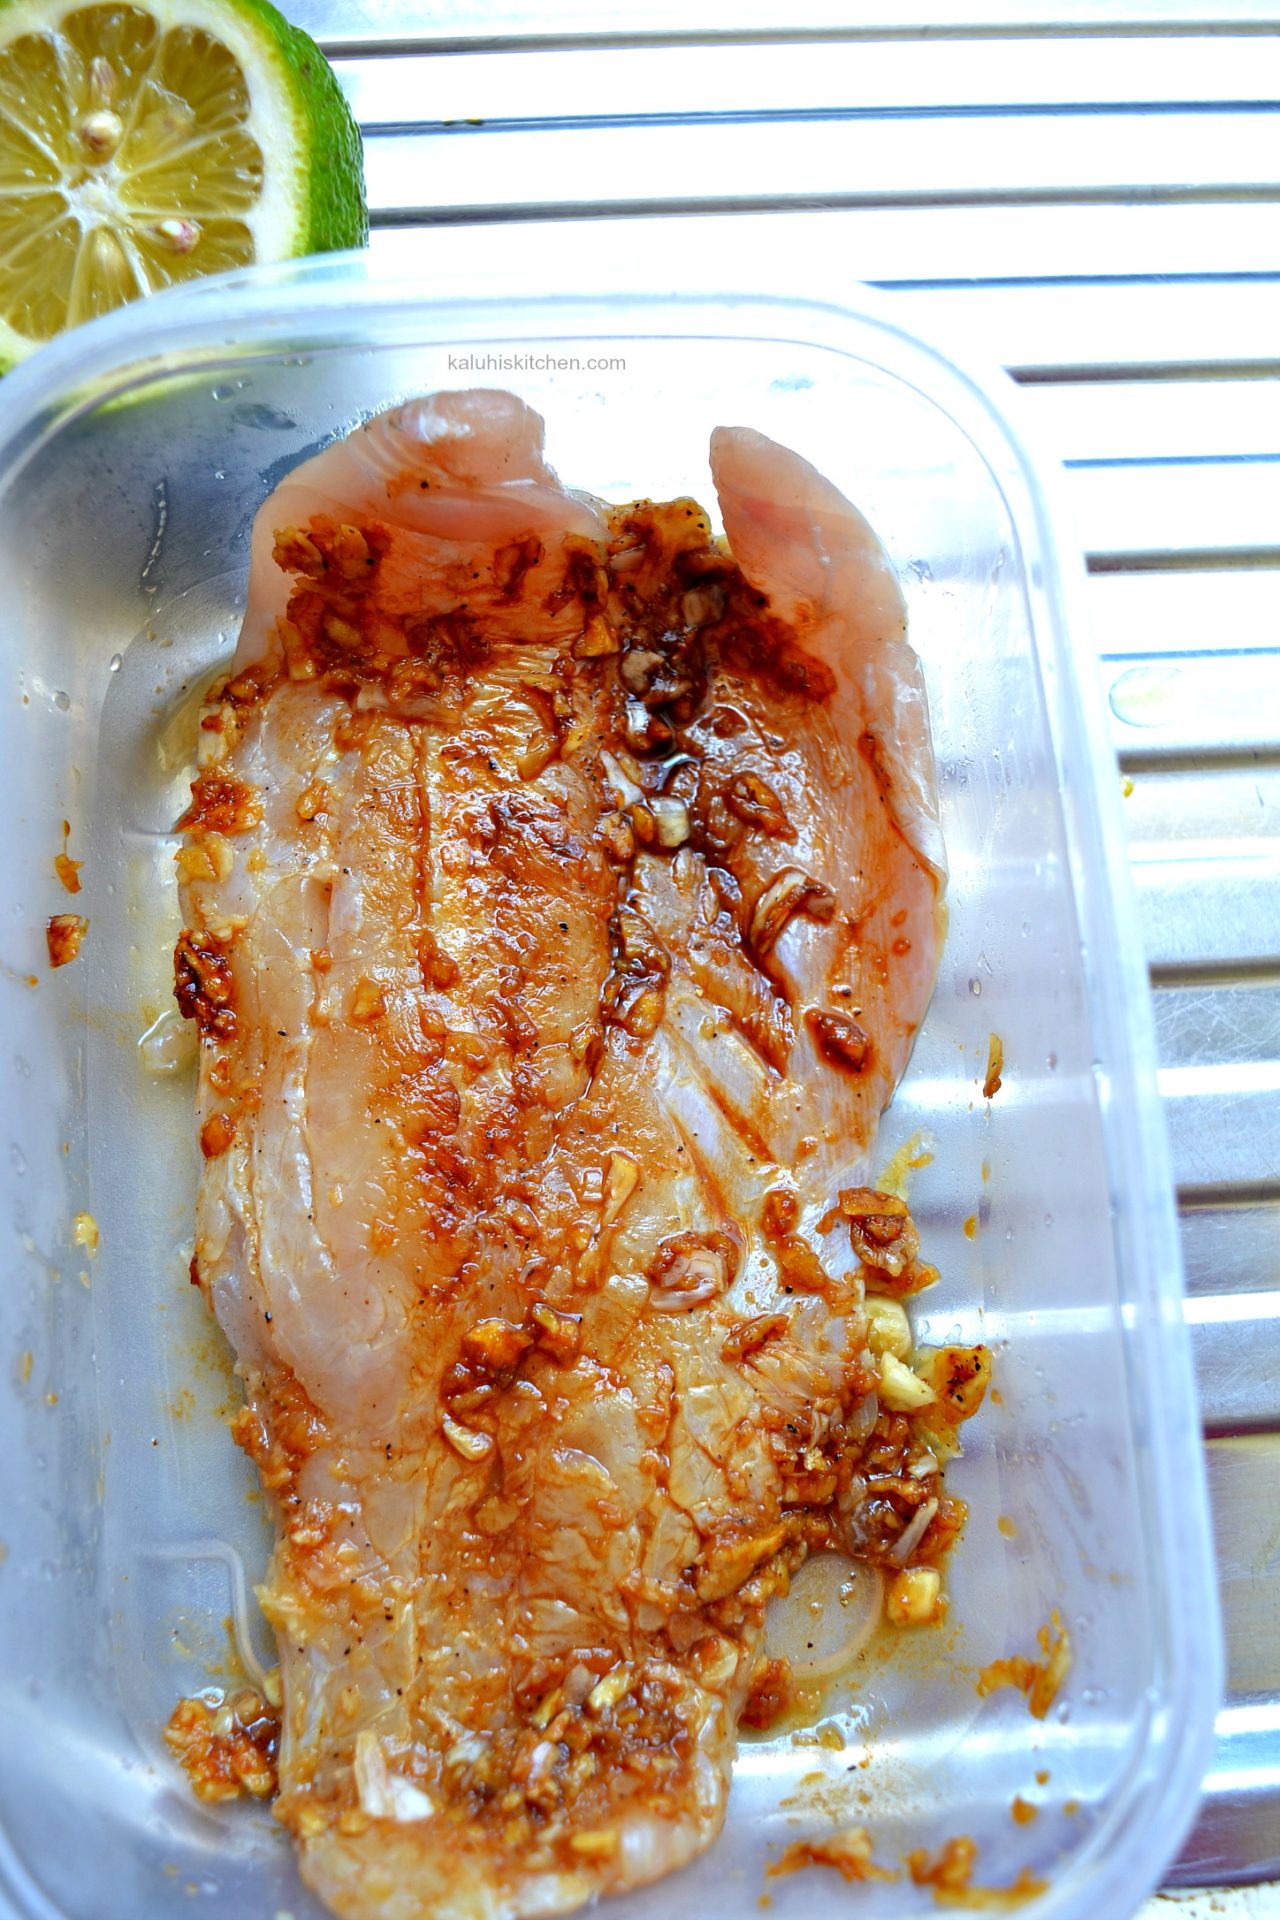 marinating fish in plenty of garlic brings out its flavor together with soy sauce and salt_how to make fish masala_kaluhiskitchen.com